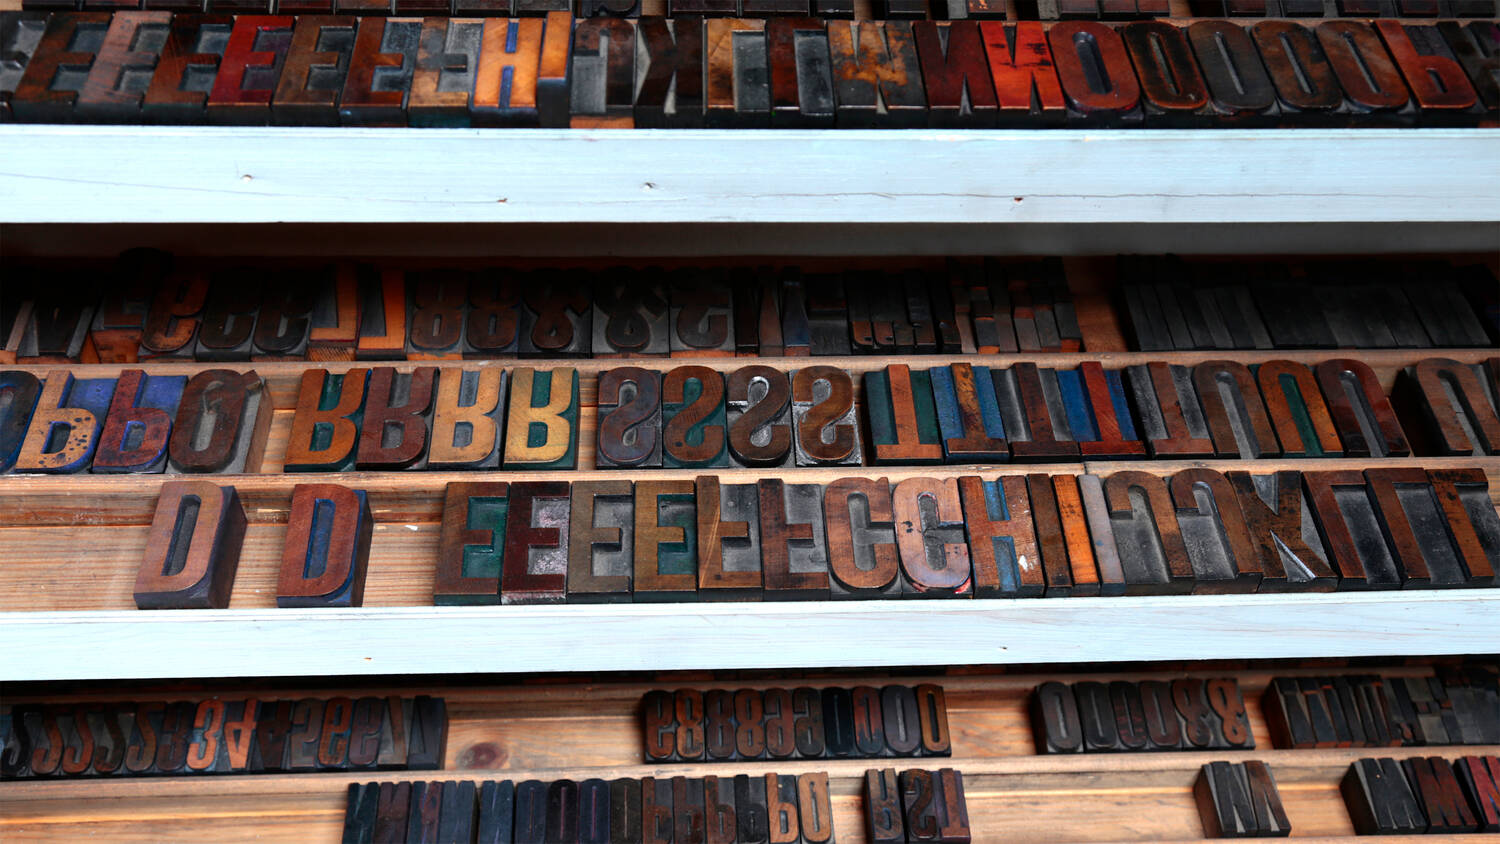 Rows of wooden letter blocks, used for printing, are lined up in special wooden cases.